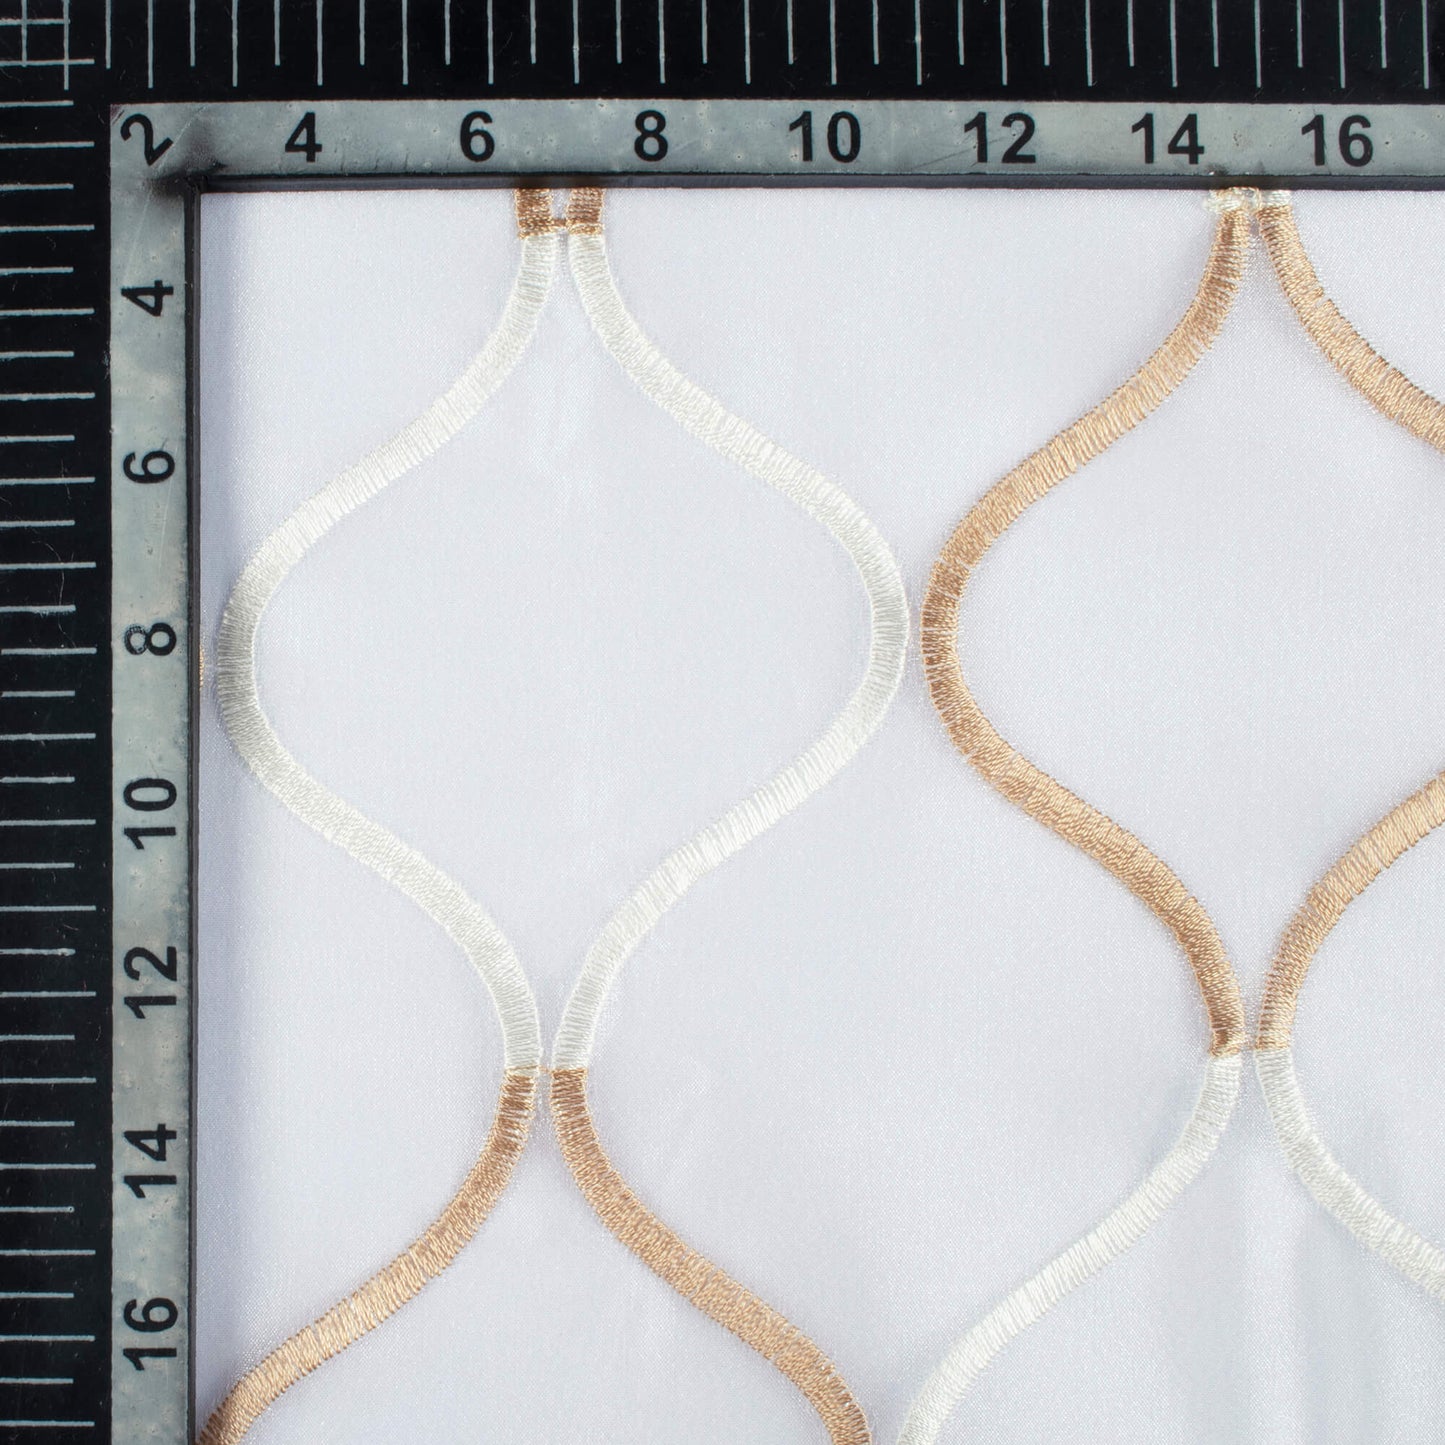 White And Tan Brown Trellis Pattern Embroidery Organza Tissue Premium Sheer Fabric (Width 48 Inches)